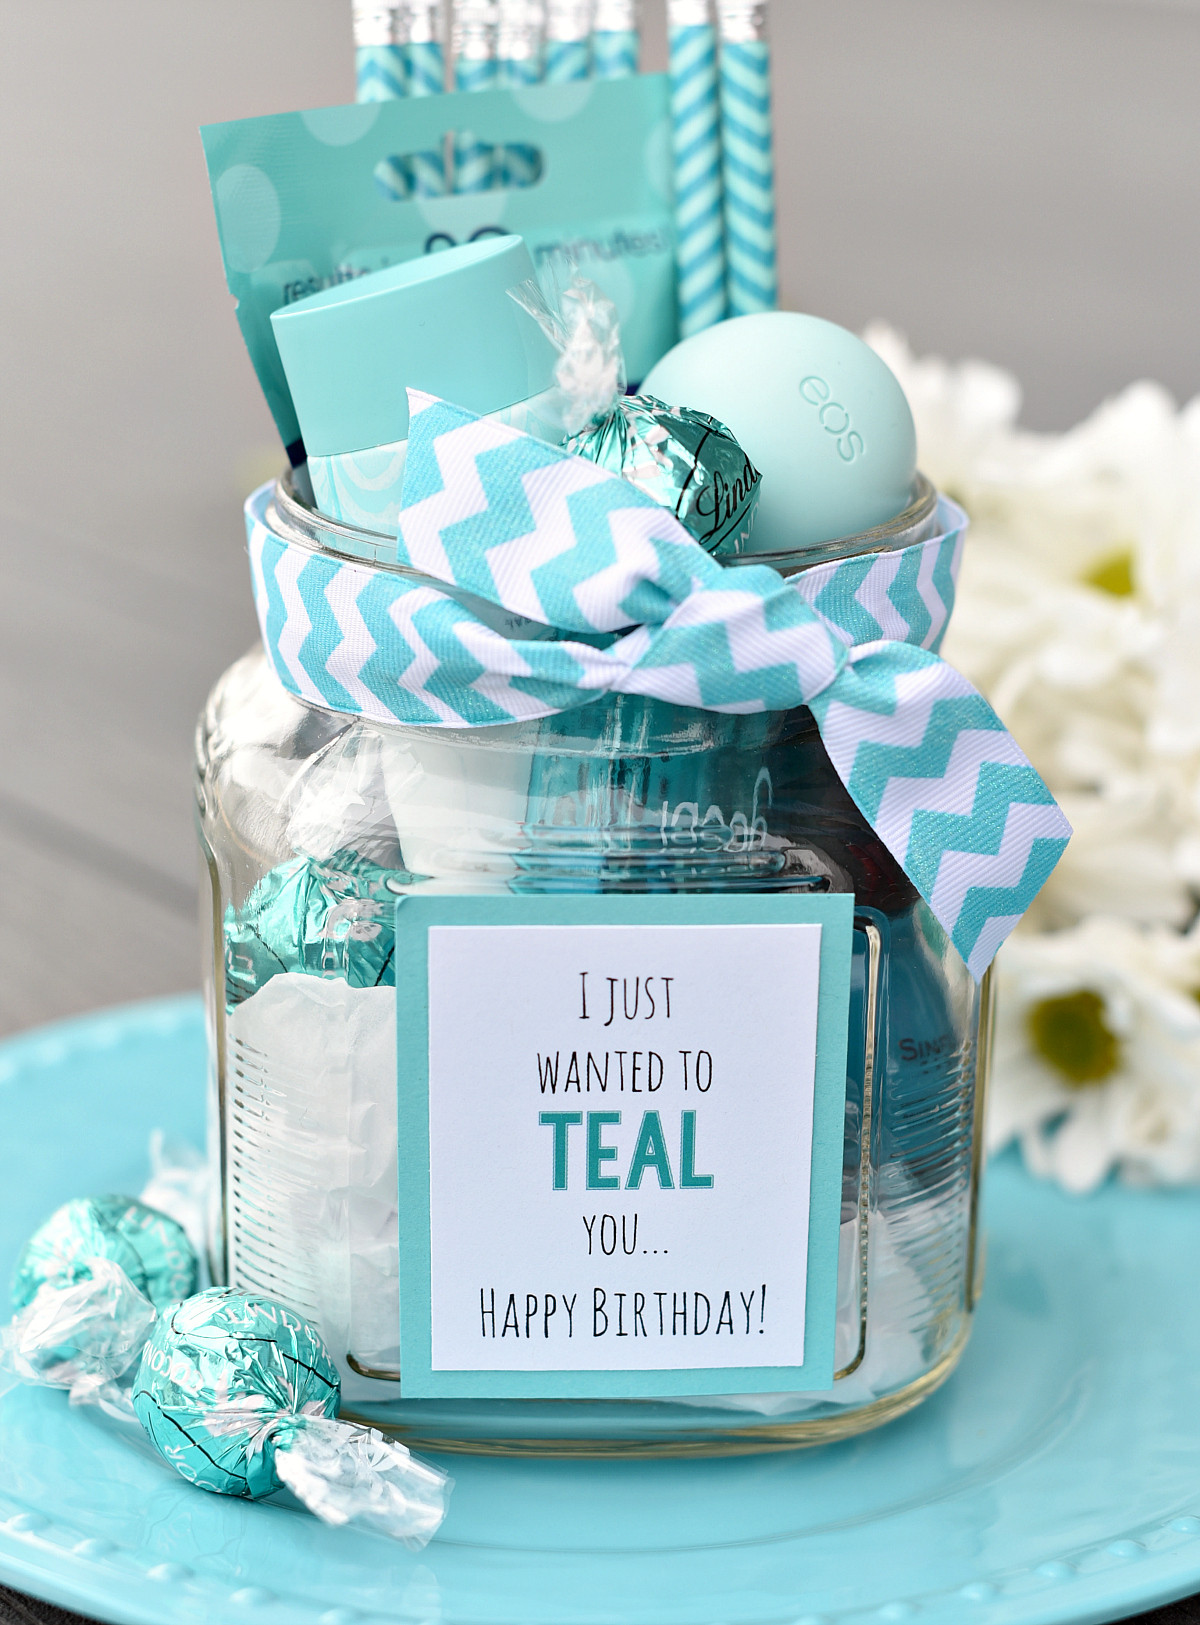 Gift Ideas For Mom'S Birthday
 Teal Birthday Gift Idea for Friends – Fun Squared